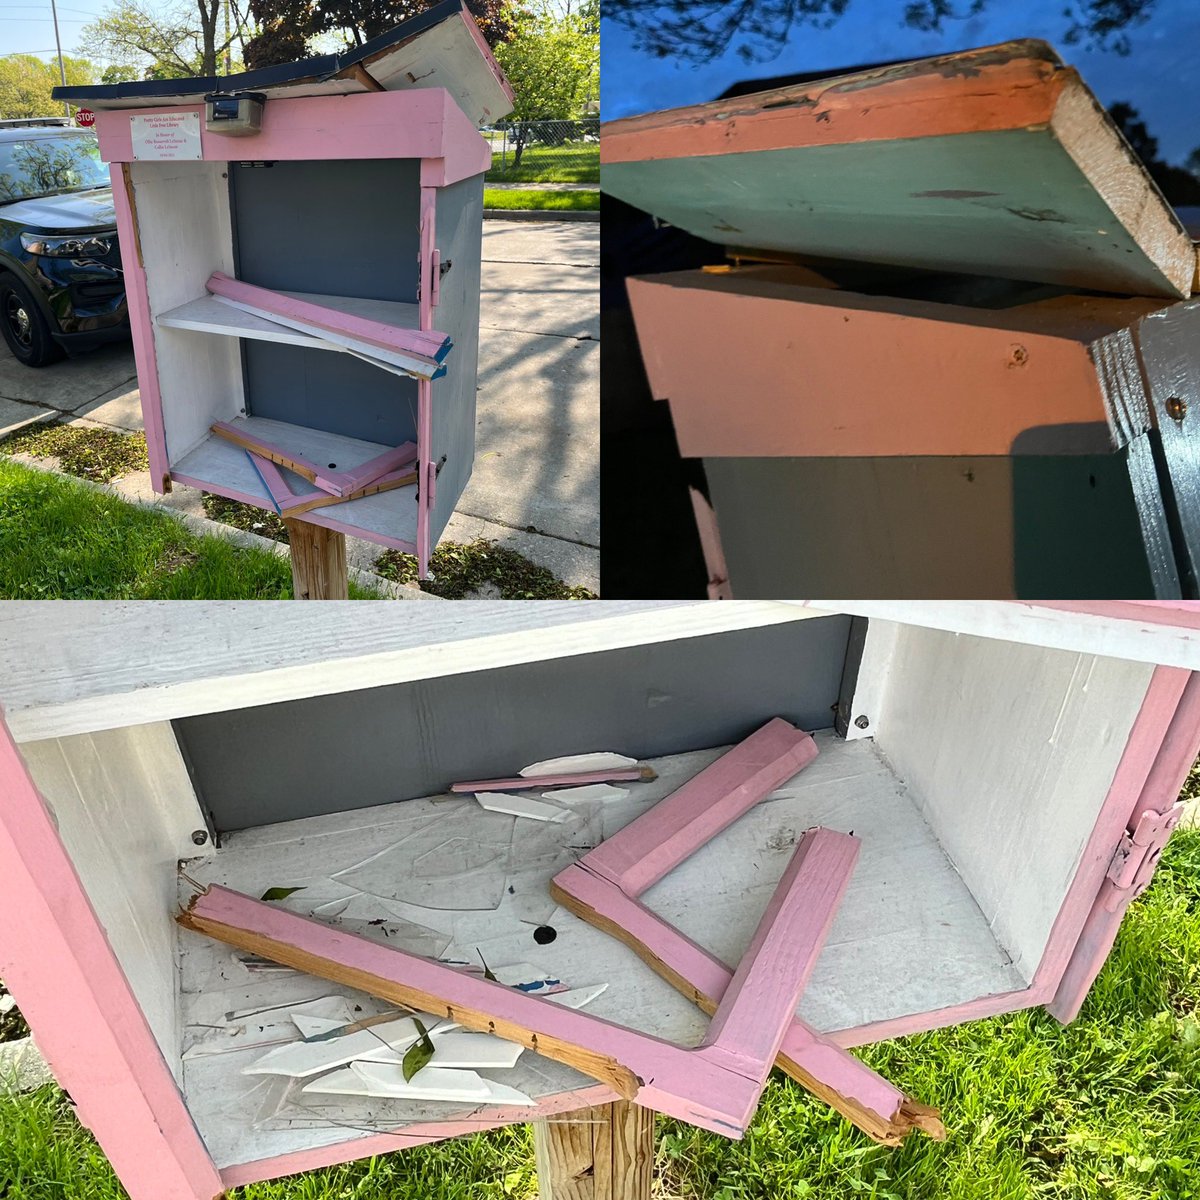 #LittleFreeLibrary vandalized in #Milwaukee. I spoke to the woman who built it. The meaning behind her efforts go far beyond the books which sat on these small shelves. 

Listen in: open.spotify.com/episode/3bfRxx…